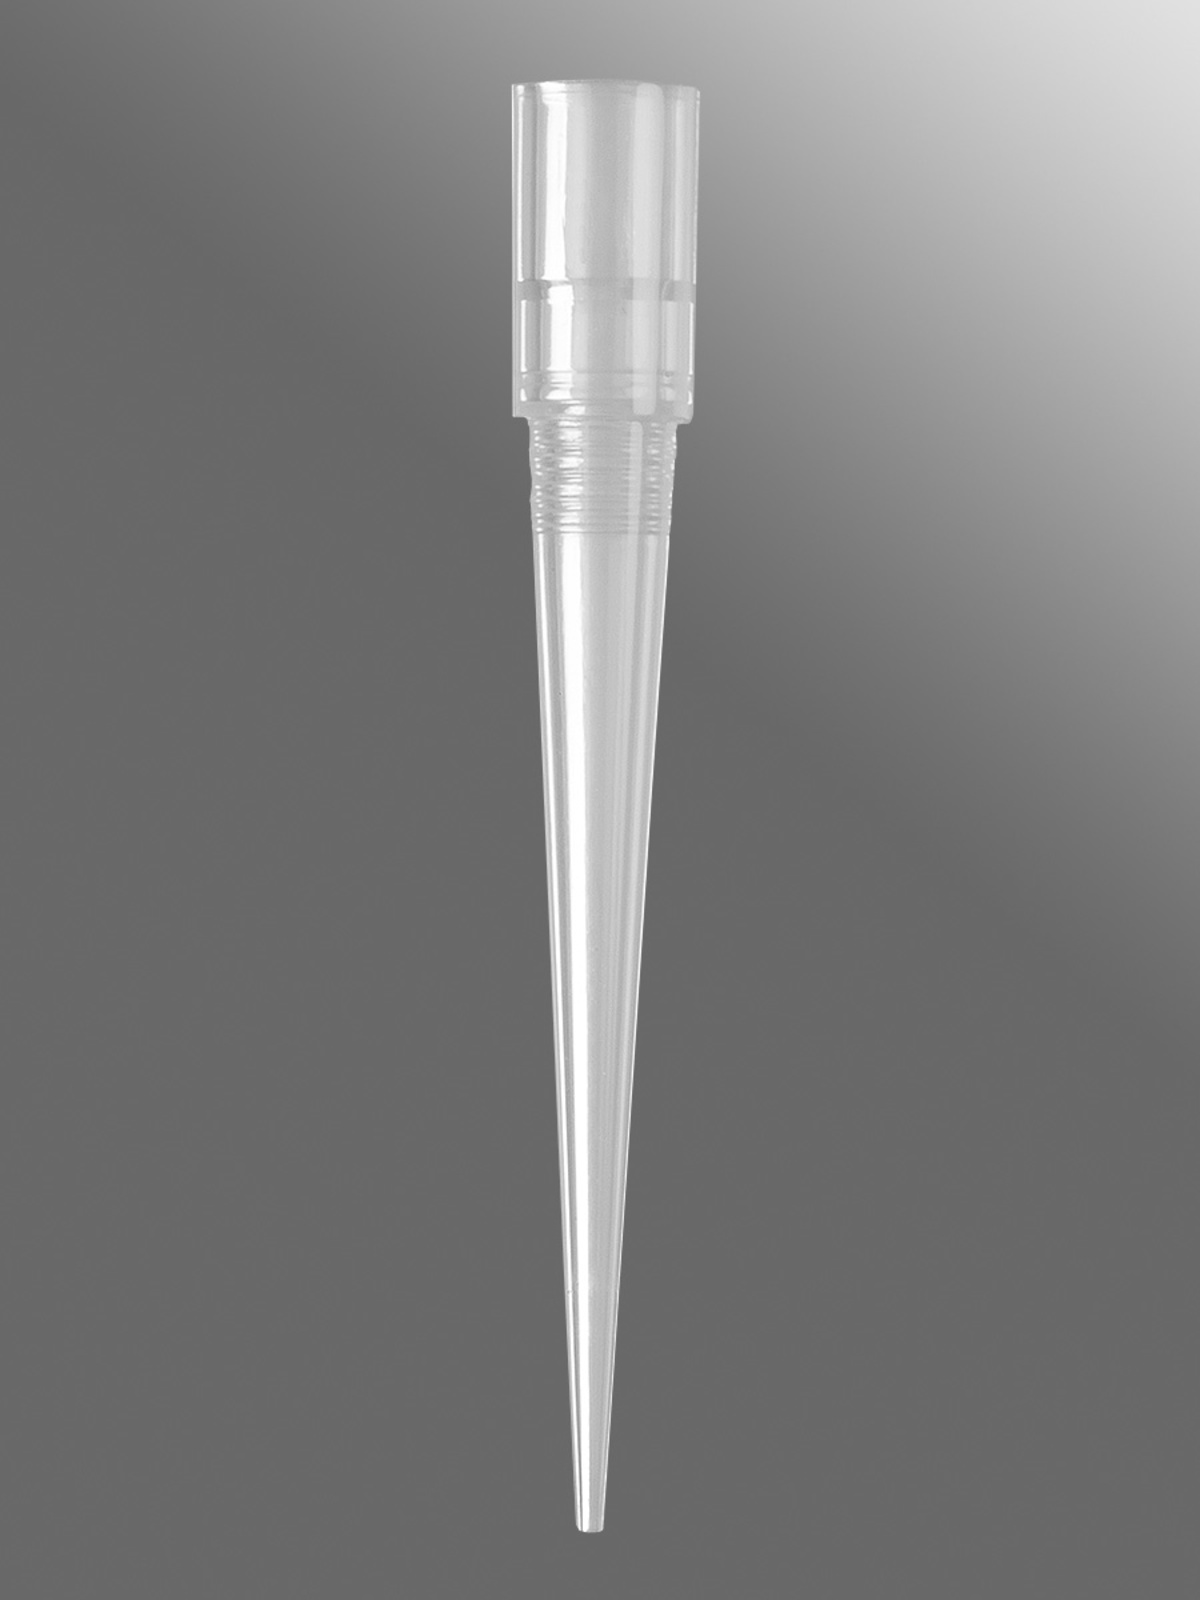 30ul Clear Maxymum Recovery Pipet Tips for Beckman FX Robotics System.